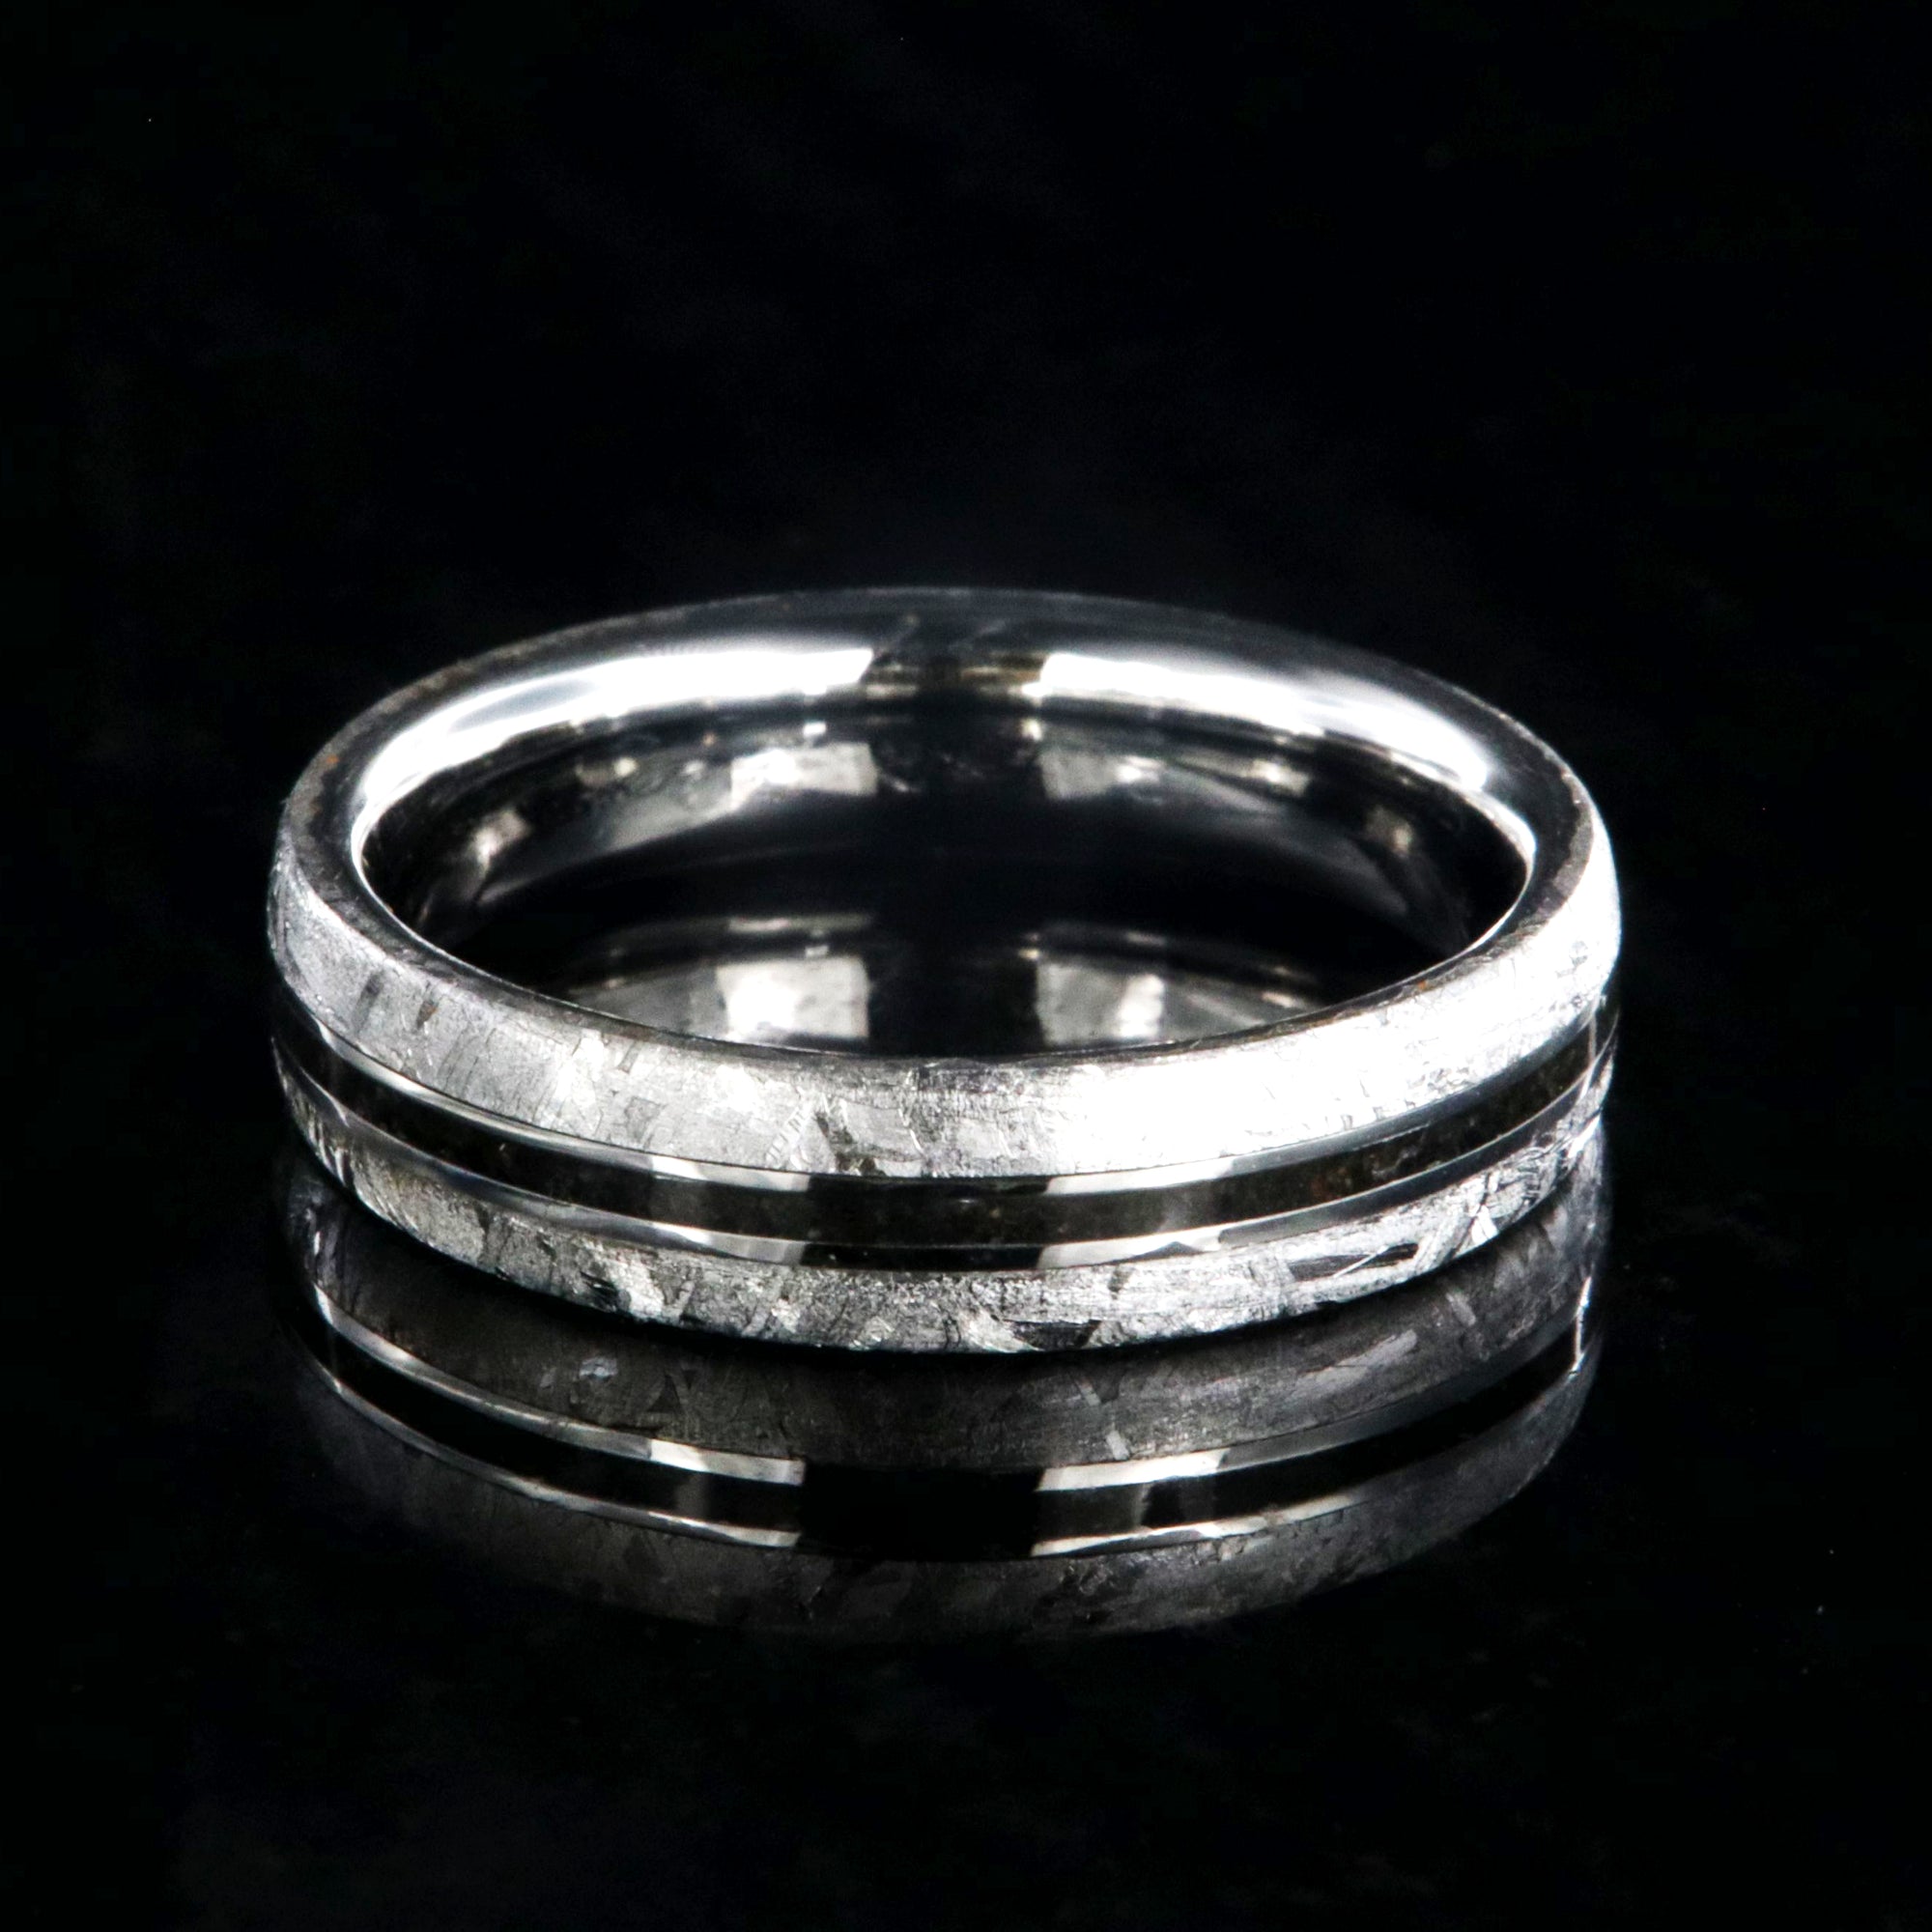 5mm wide women's wedding band with Gibeon meteorite edges and thin dinosaur bone inlay with cobalt sleeve